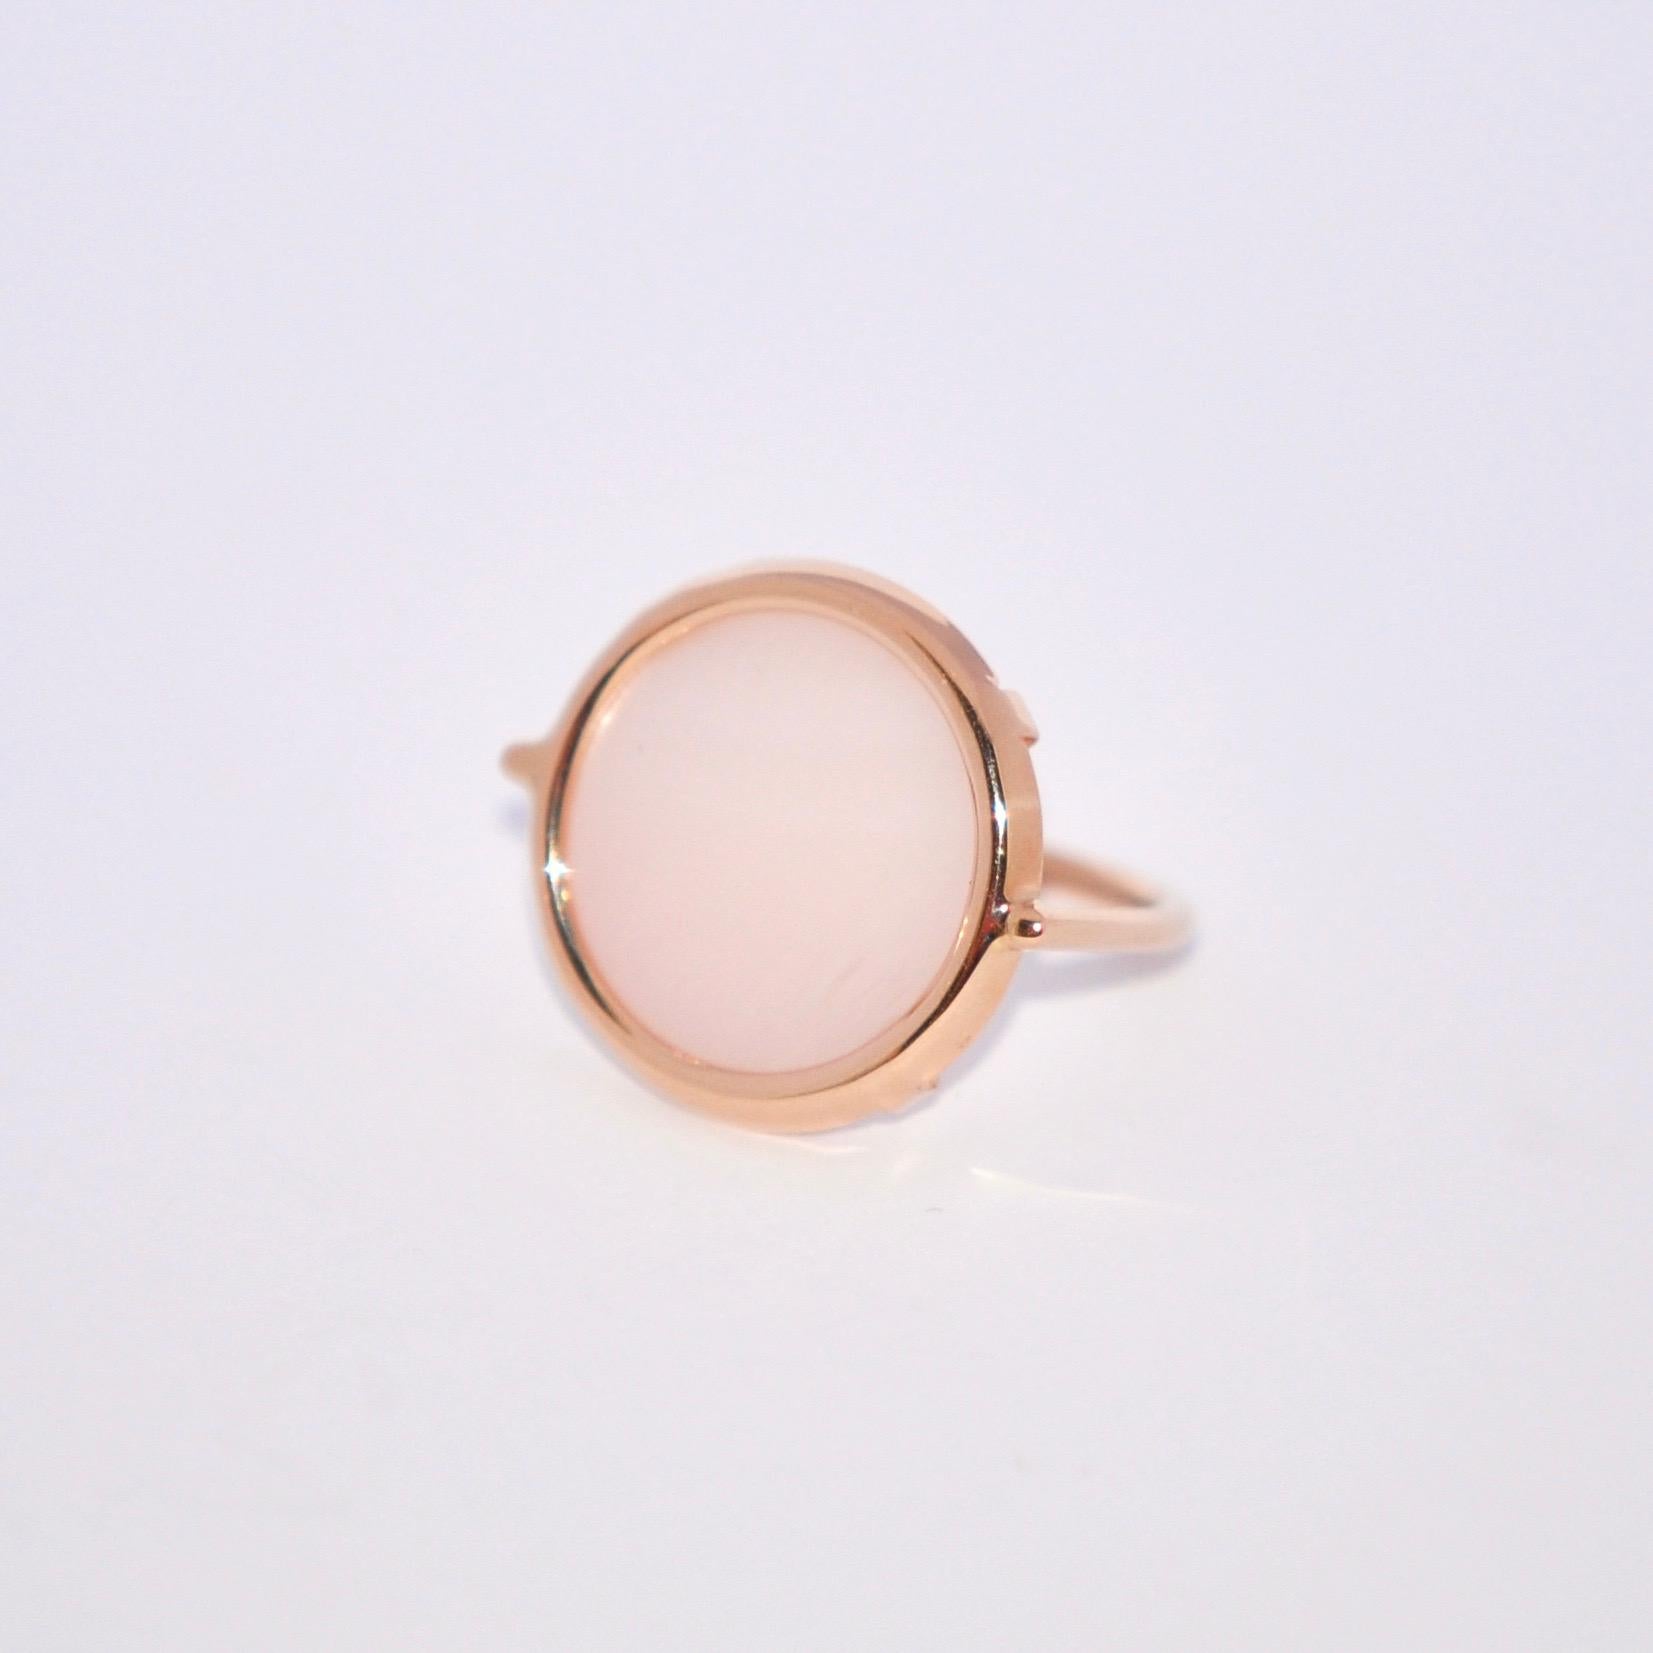 Discover this Mother-of-pearl and Rose Gold 18 Karat Fashion Ring.
Rose Mother-of-pearl
Rose Gold 18 Karat
French Size 52
US Size 6